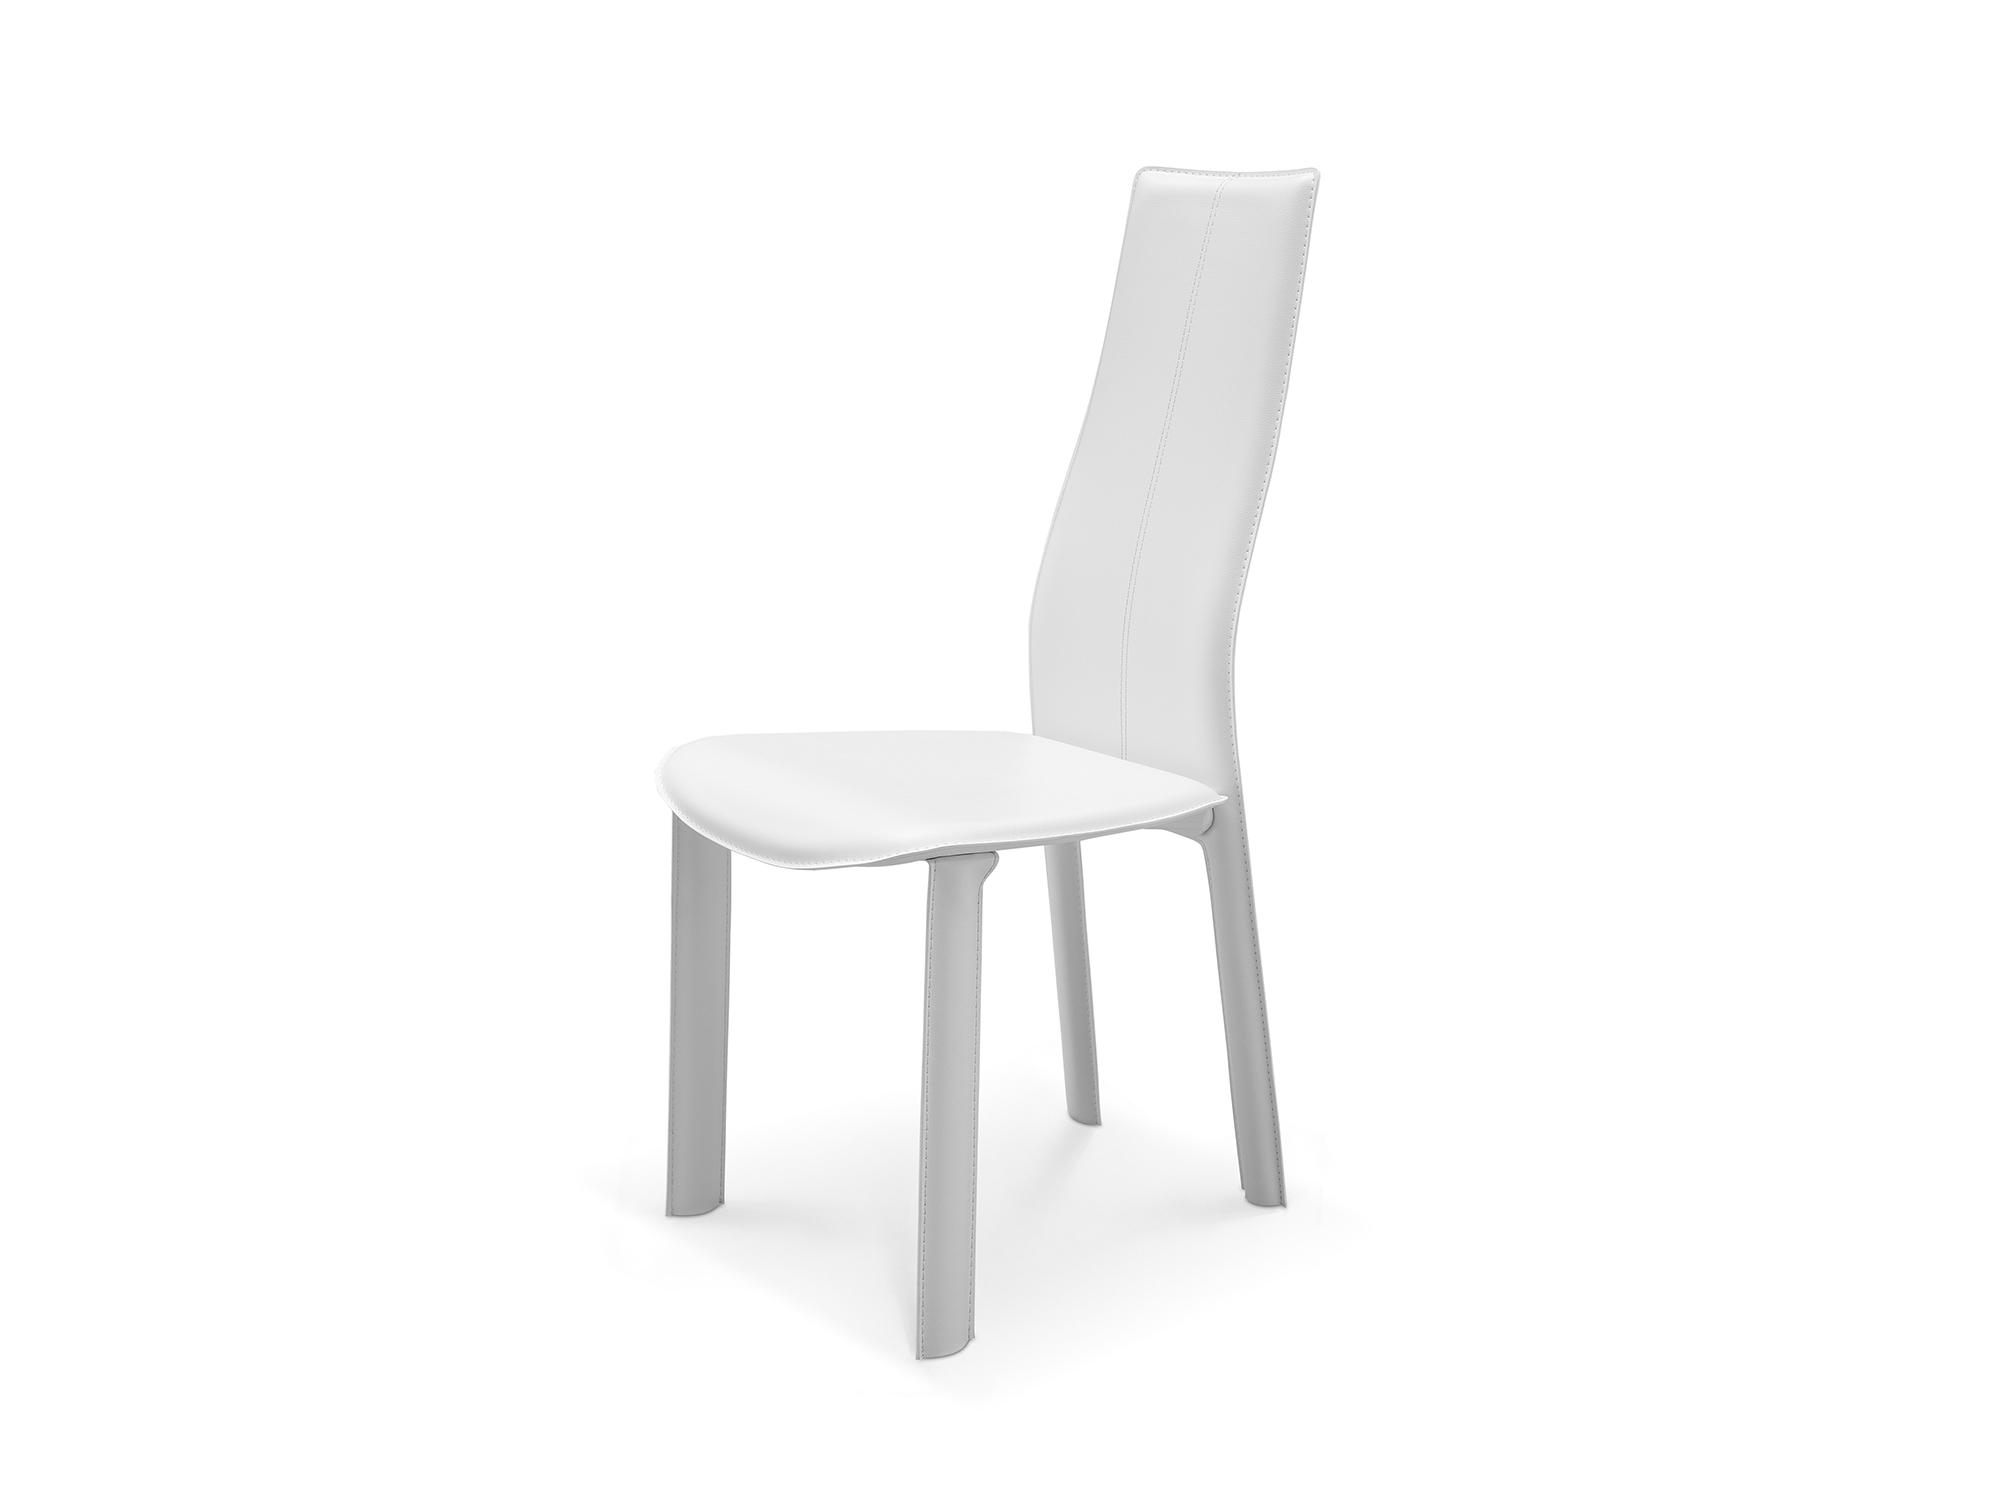 Contemporary Dining Chair Set DC1004H-WHT Allison DC1004H-WHT in White Faux Leather